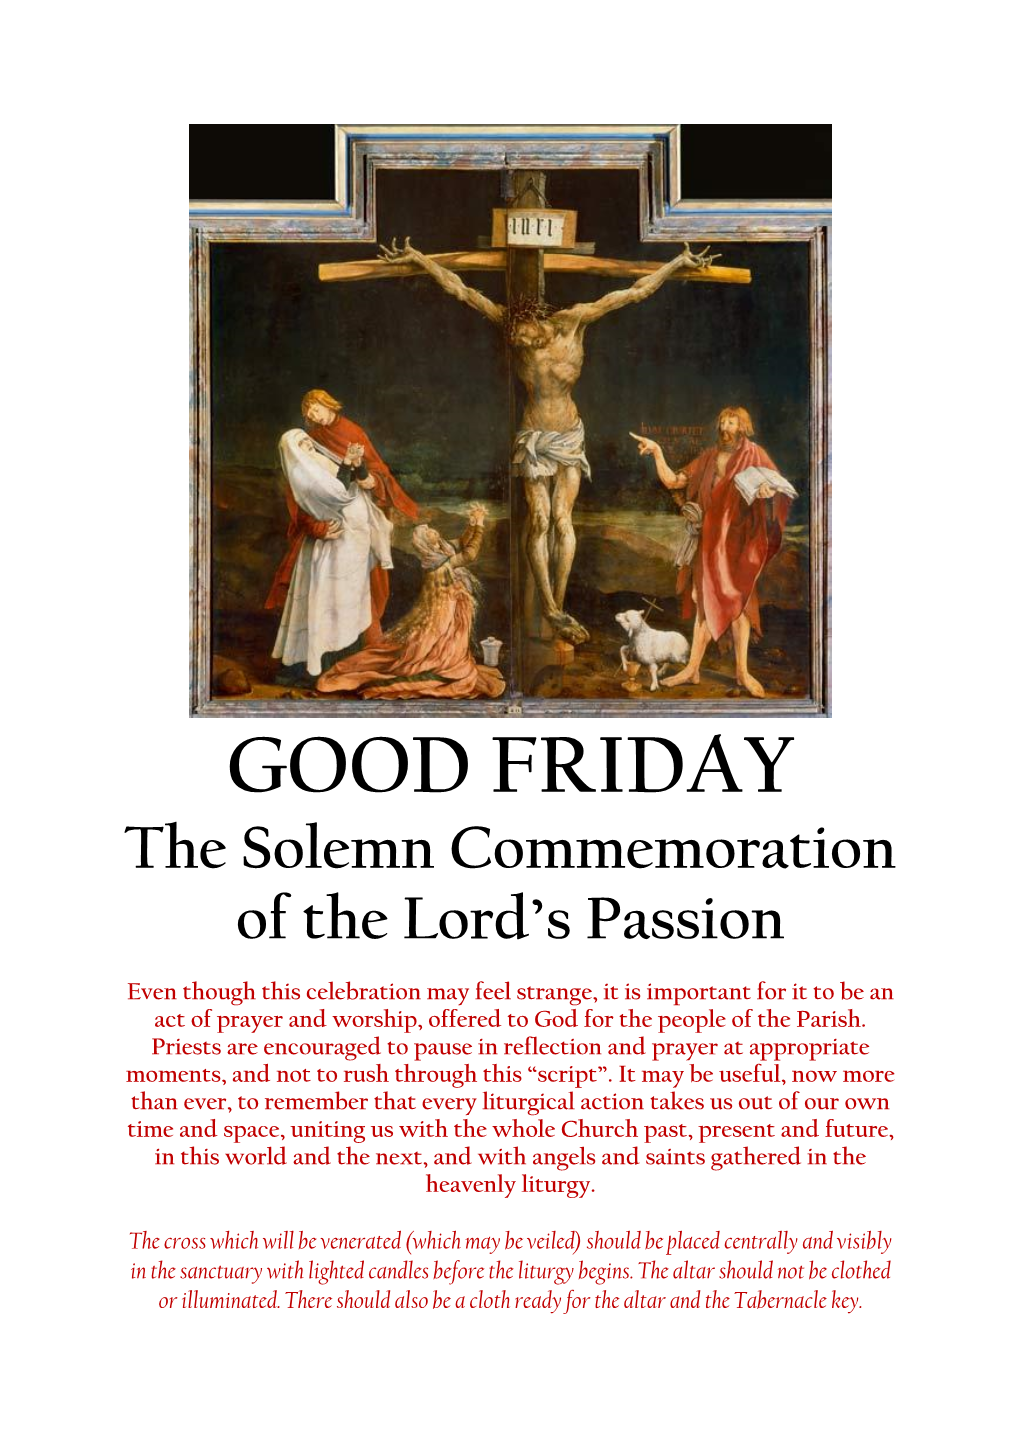 GOOD FRIDAY the Solemn Commemoration